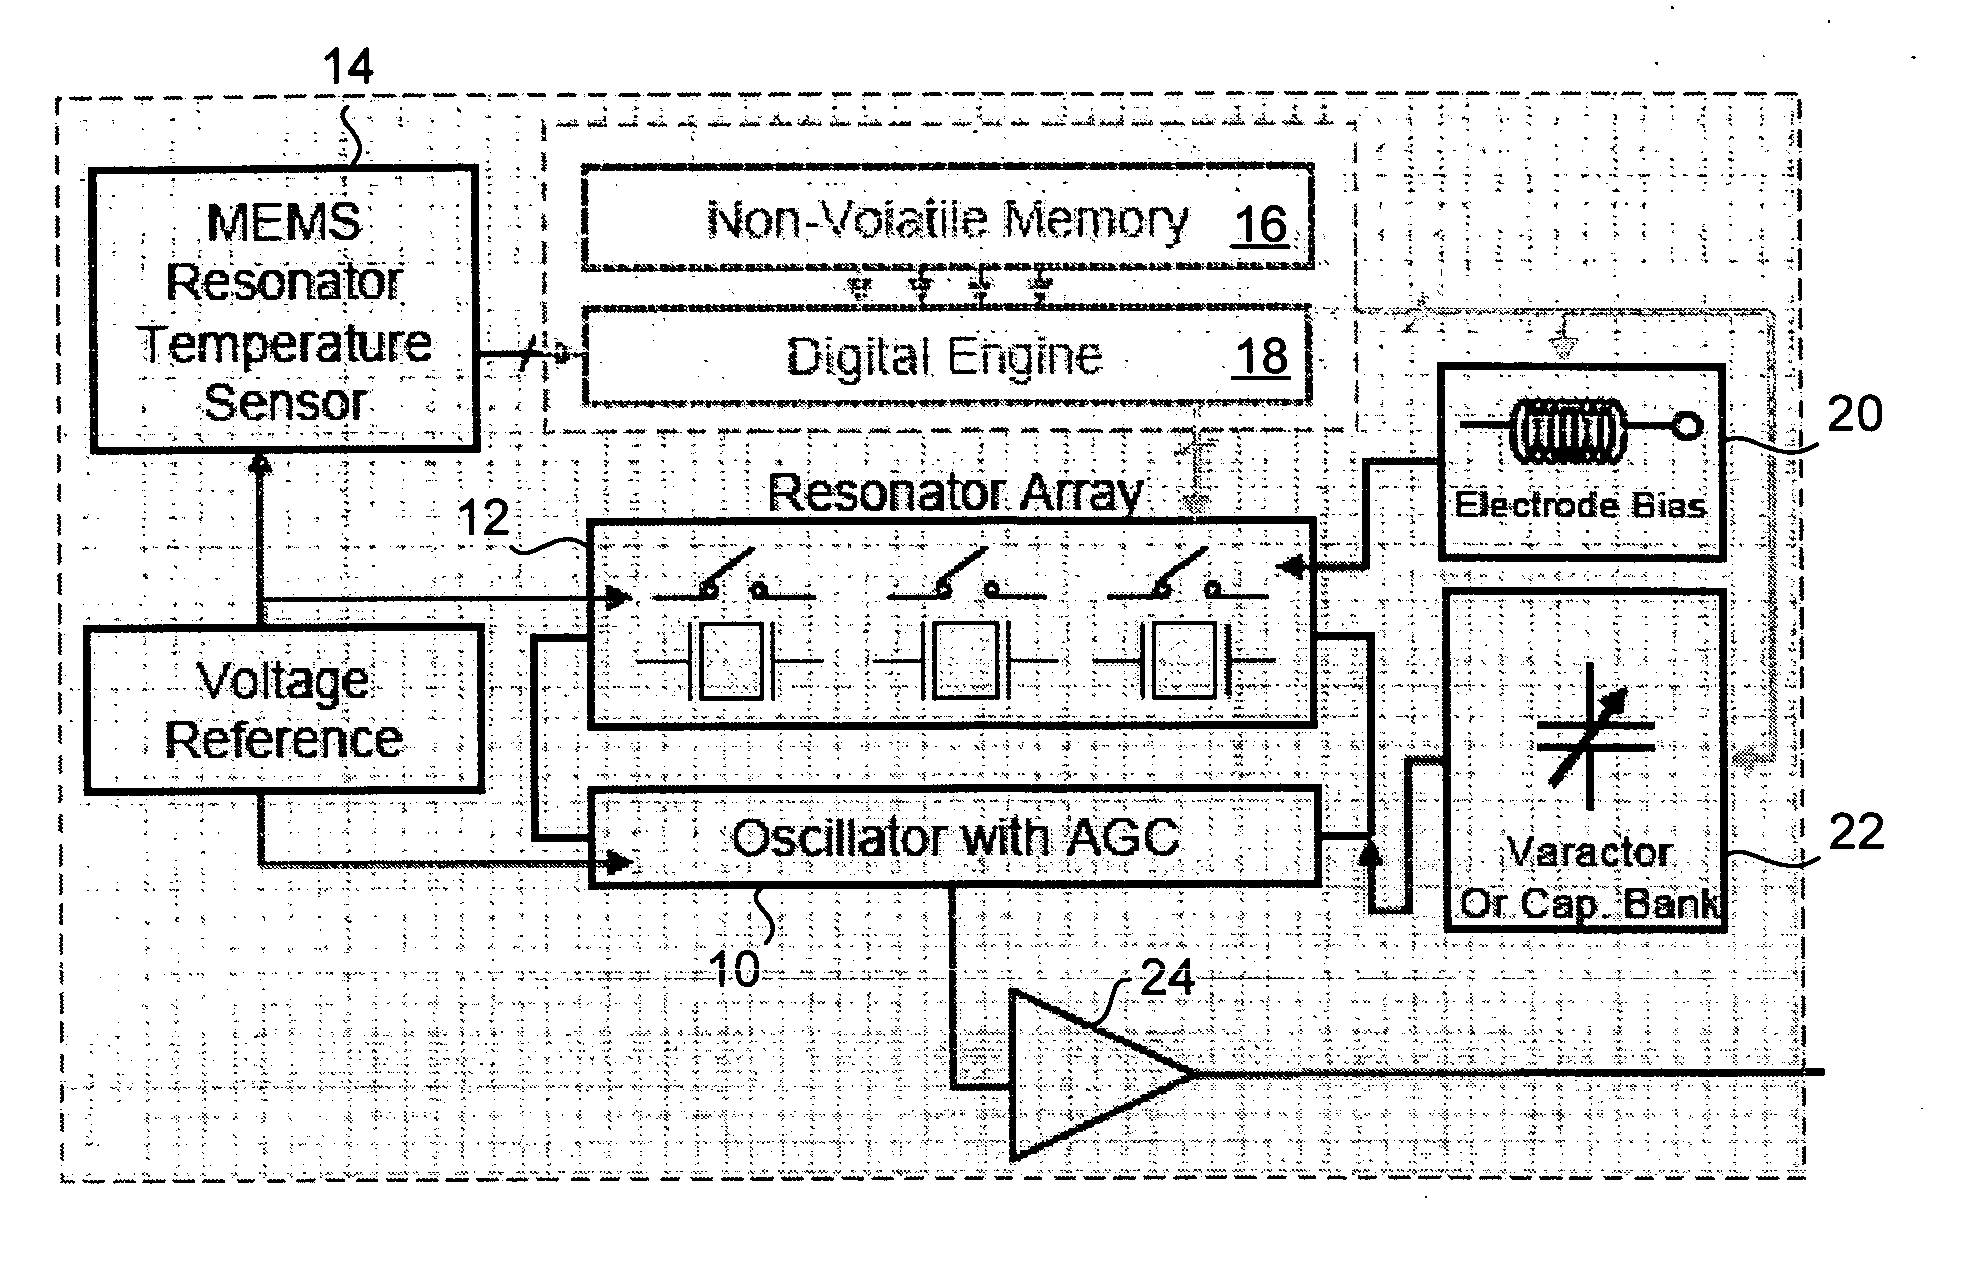 Temperature compensated oscillator including MEMS resonator for frequency control